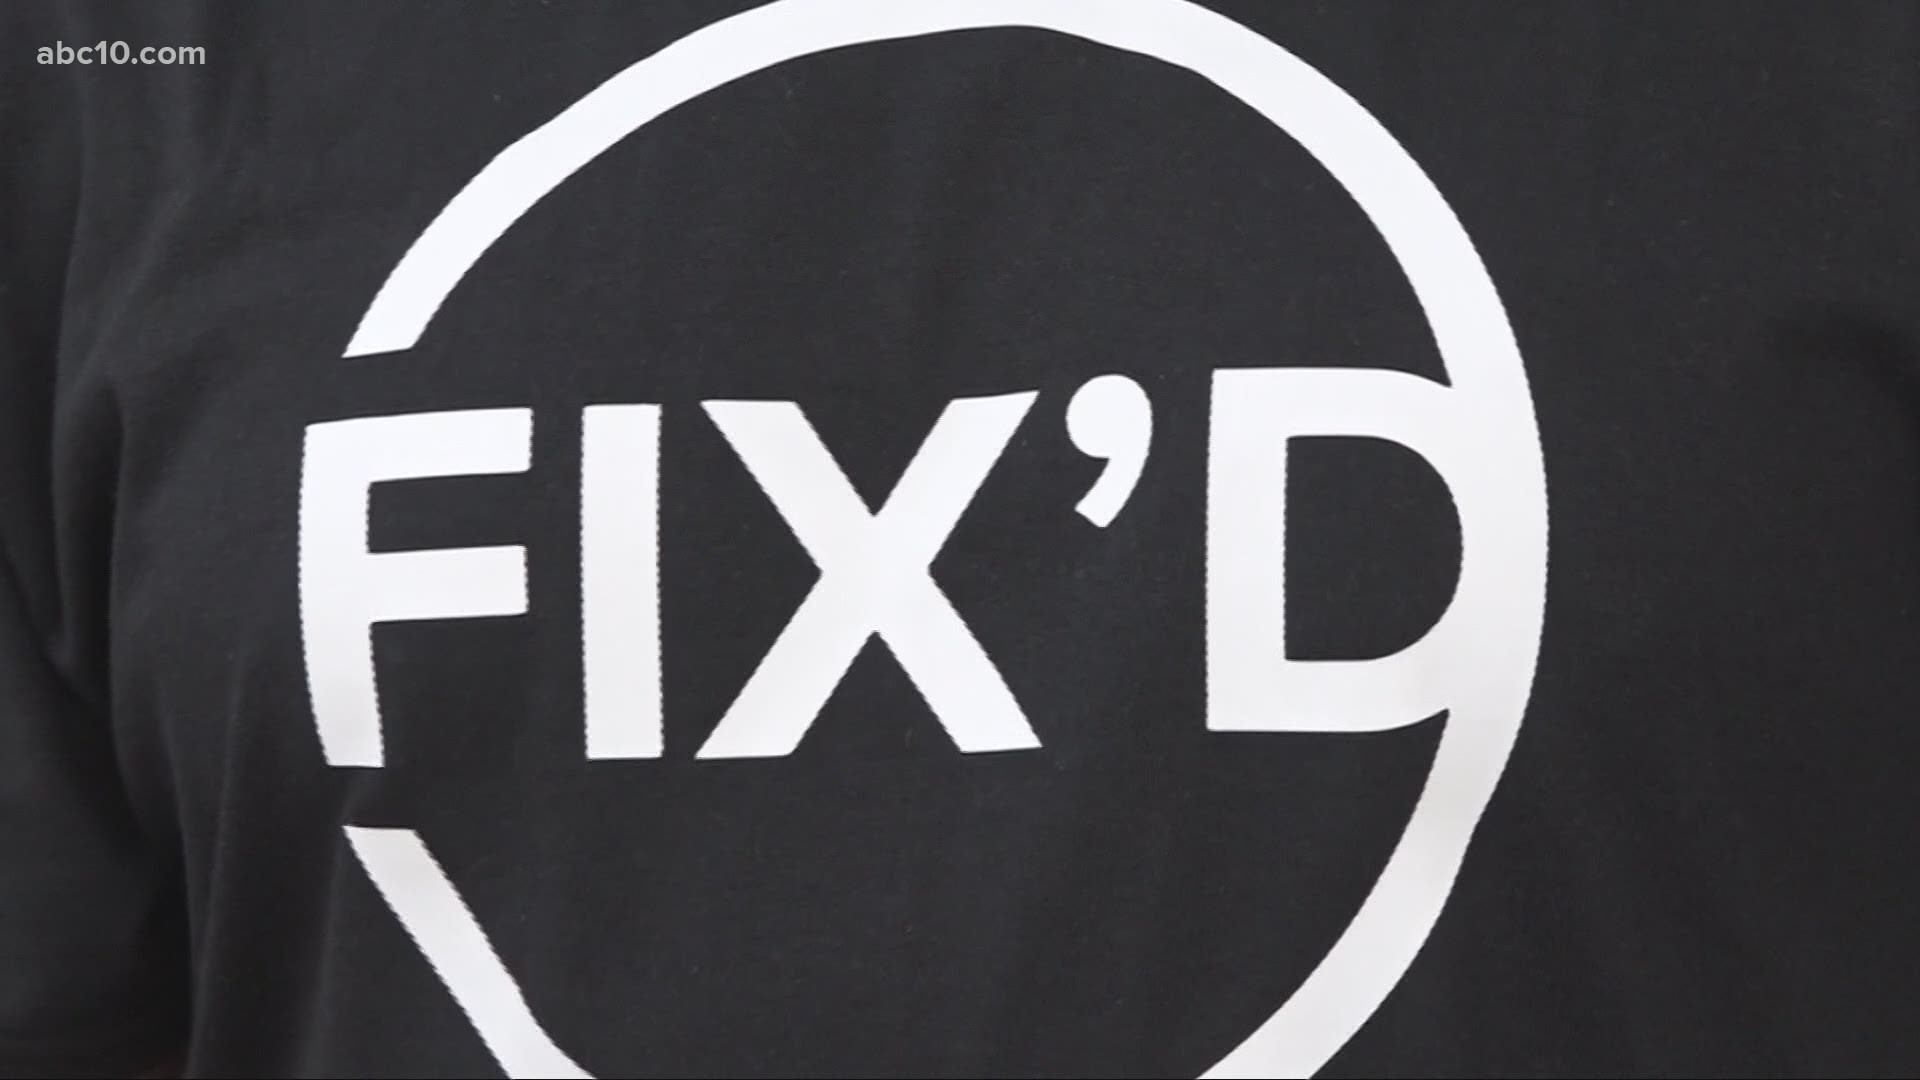 Fix'd in Tracy was started by veterans to help veterans deal with PTSD, addiction and adapting to normal life.